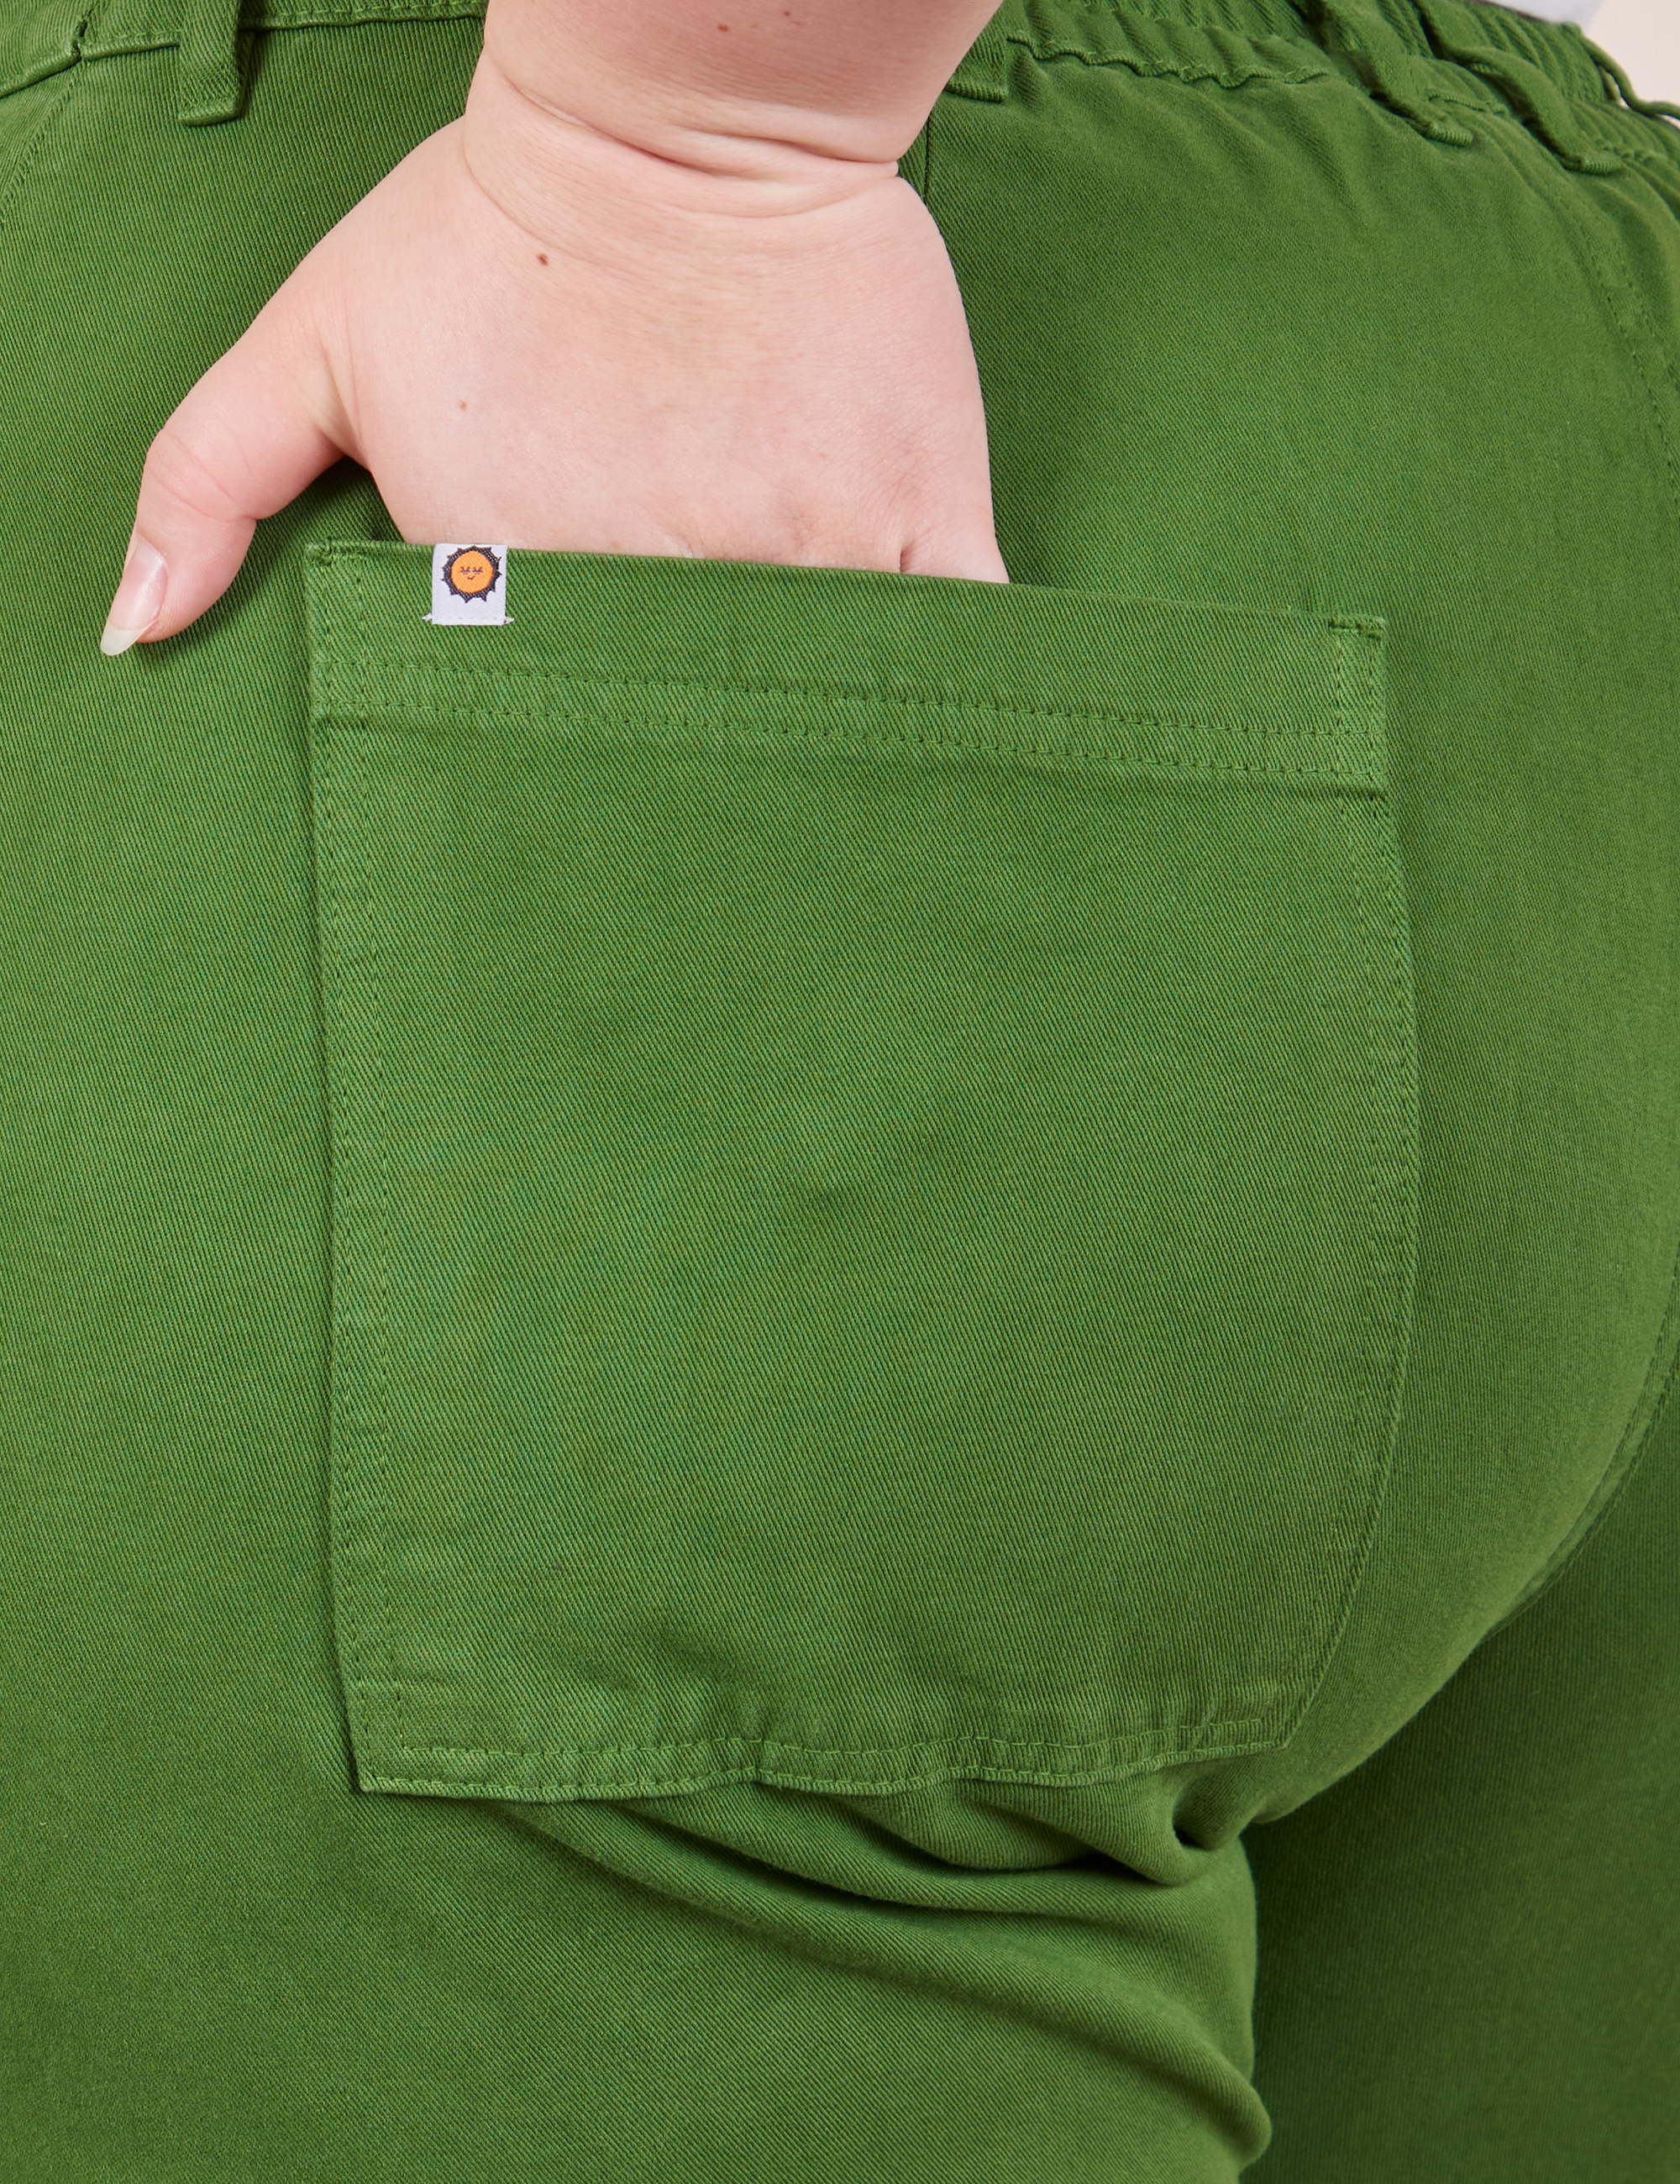 Petite Pencil Pants in Lawn Green back pocket close up. Ashley has her hand in the pocket.